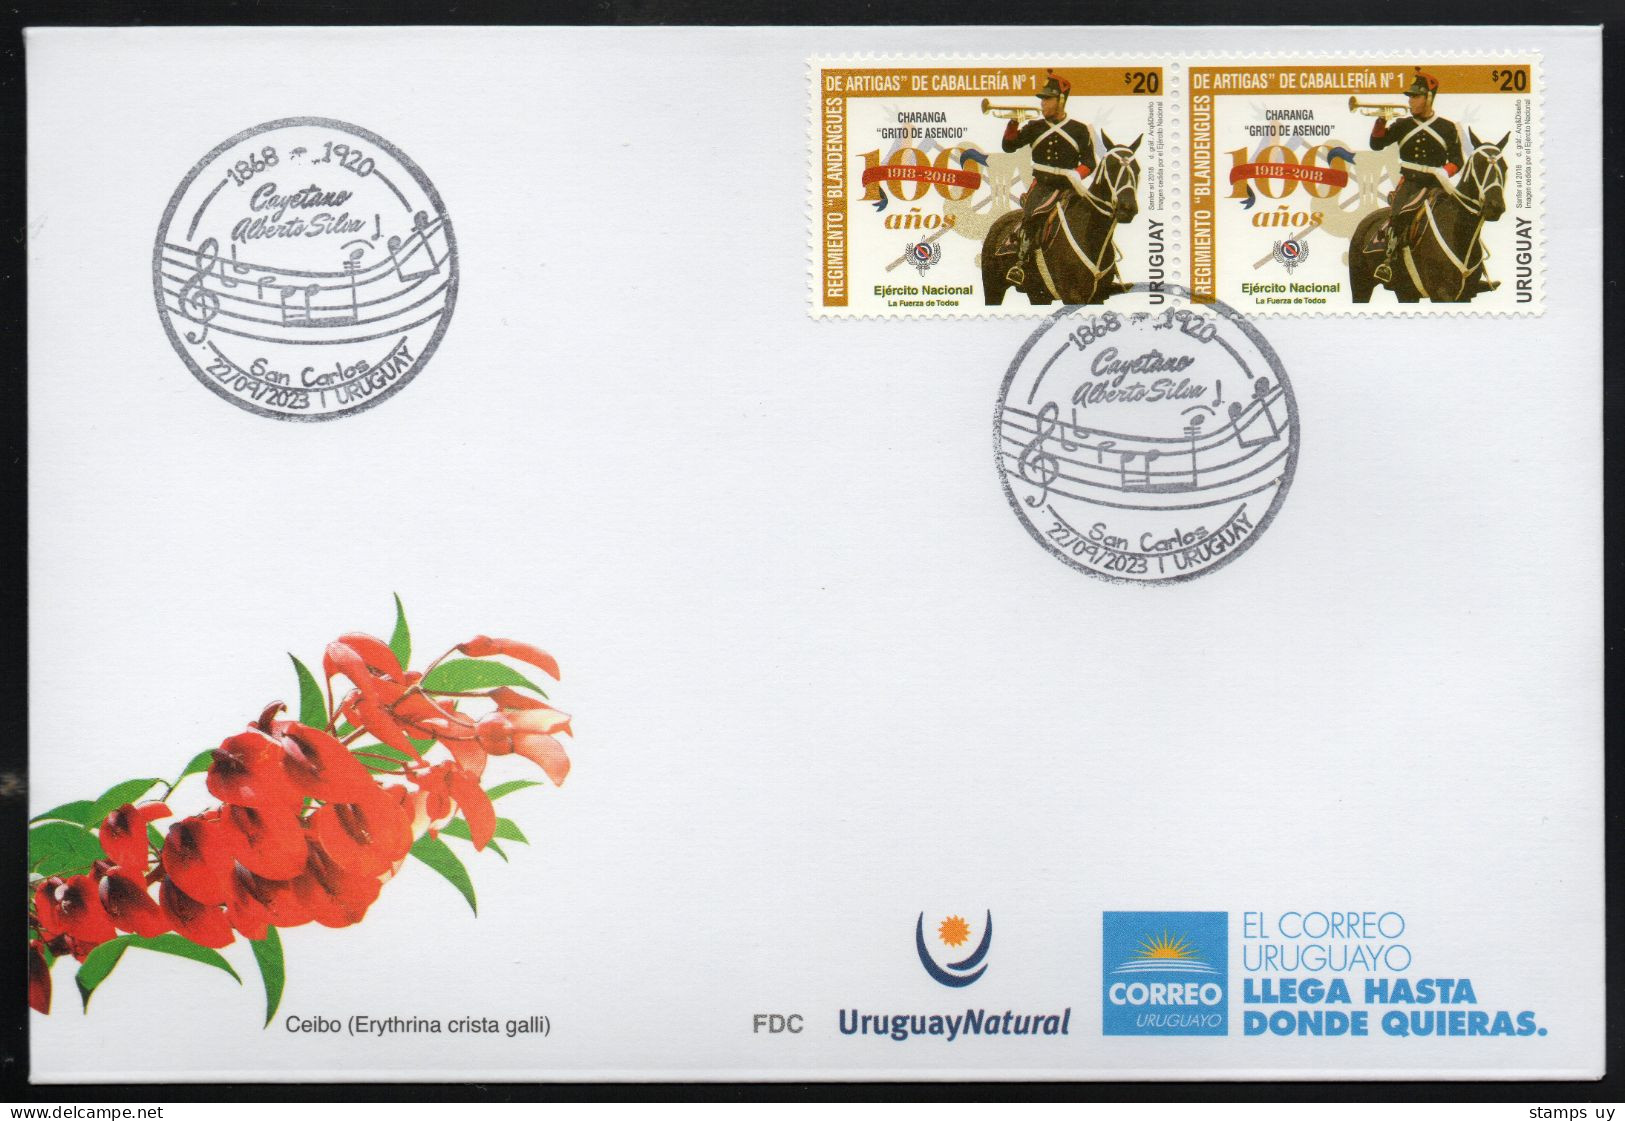 URUGUAY 2023 (Music, Composers, Militar, Chivalry, Horses, Charanga, Instruments, Bugle) - 1 Cover With Special Postmark - Uruguay